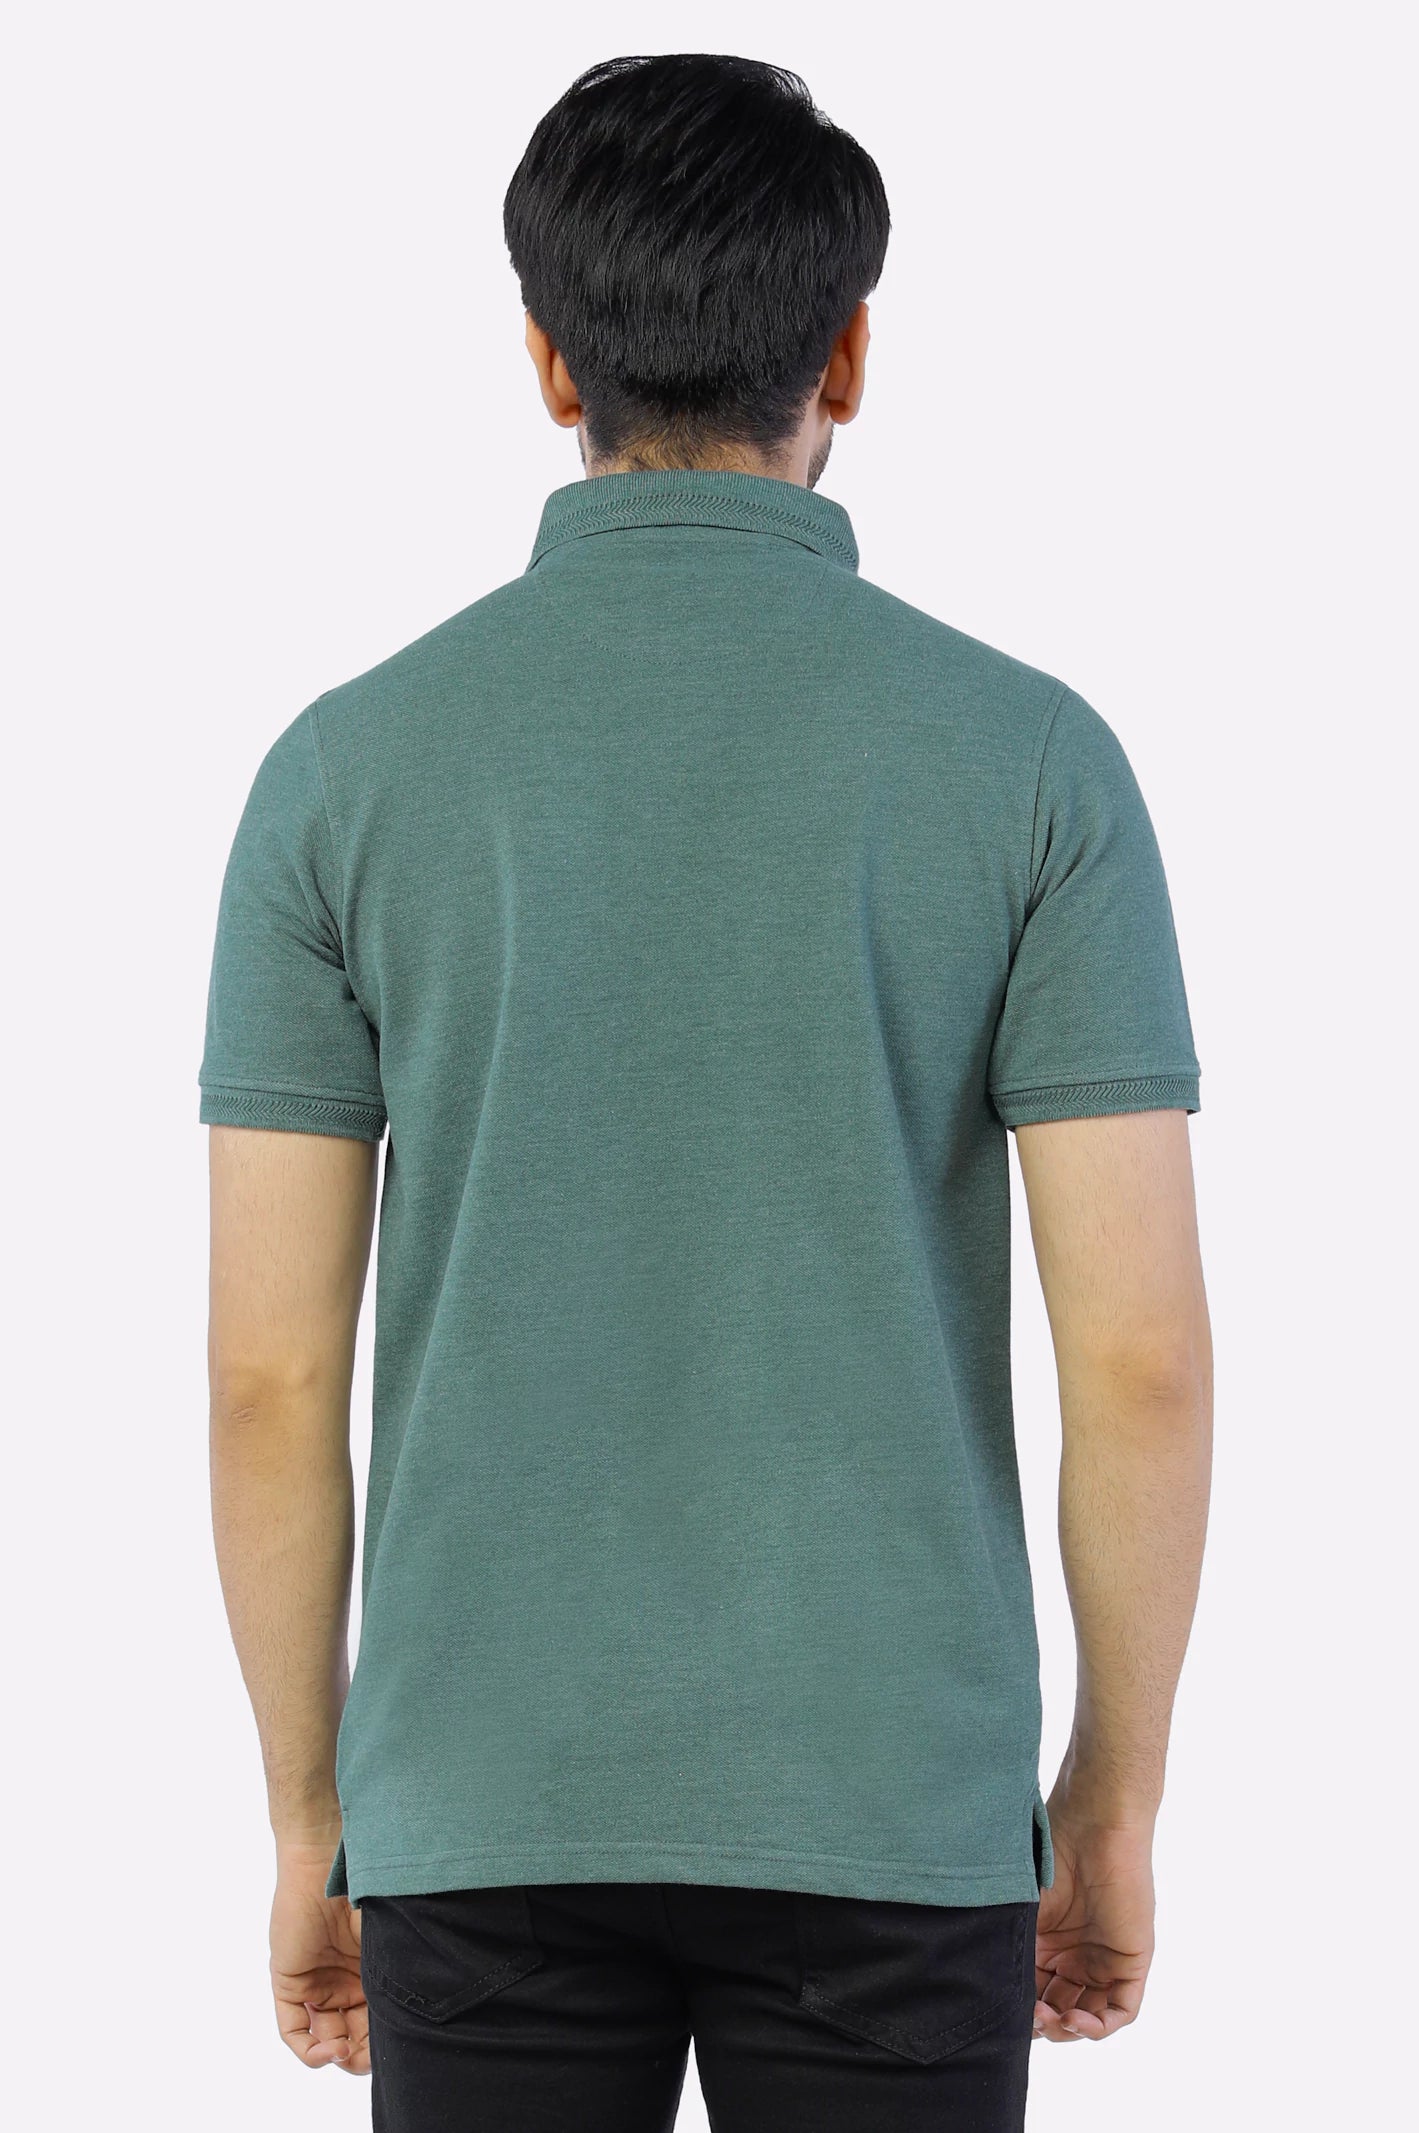 Heather Green Jacquard Collar Polo From Diners